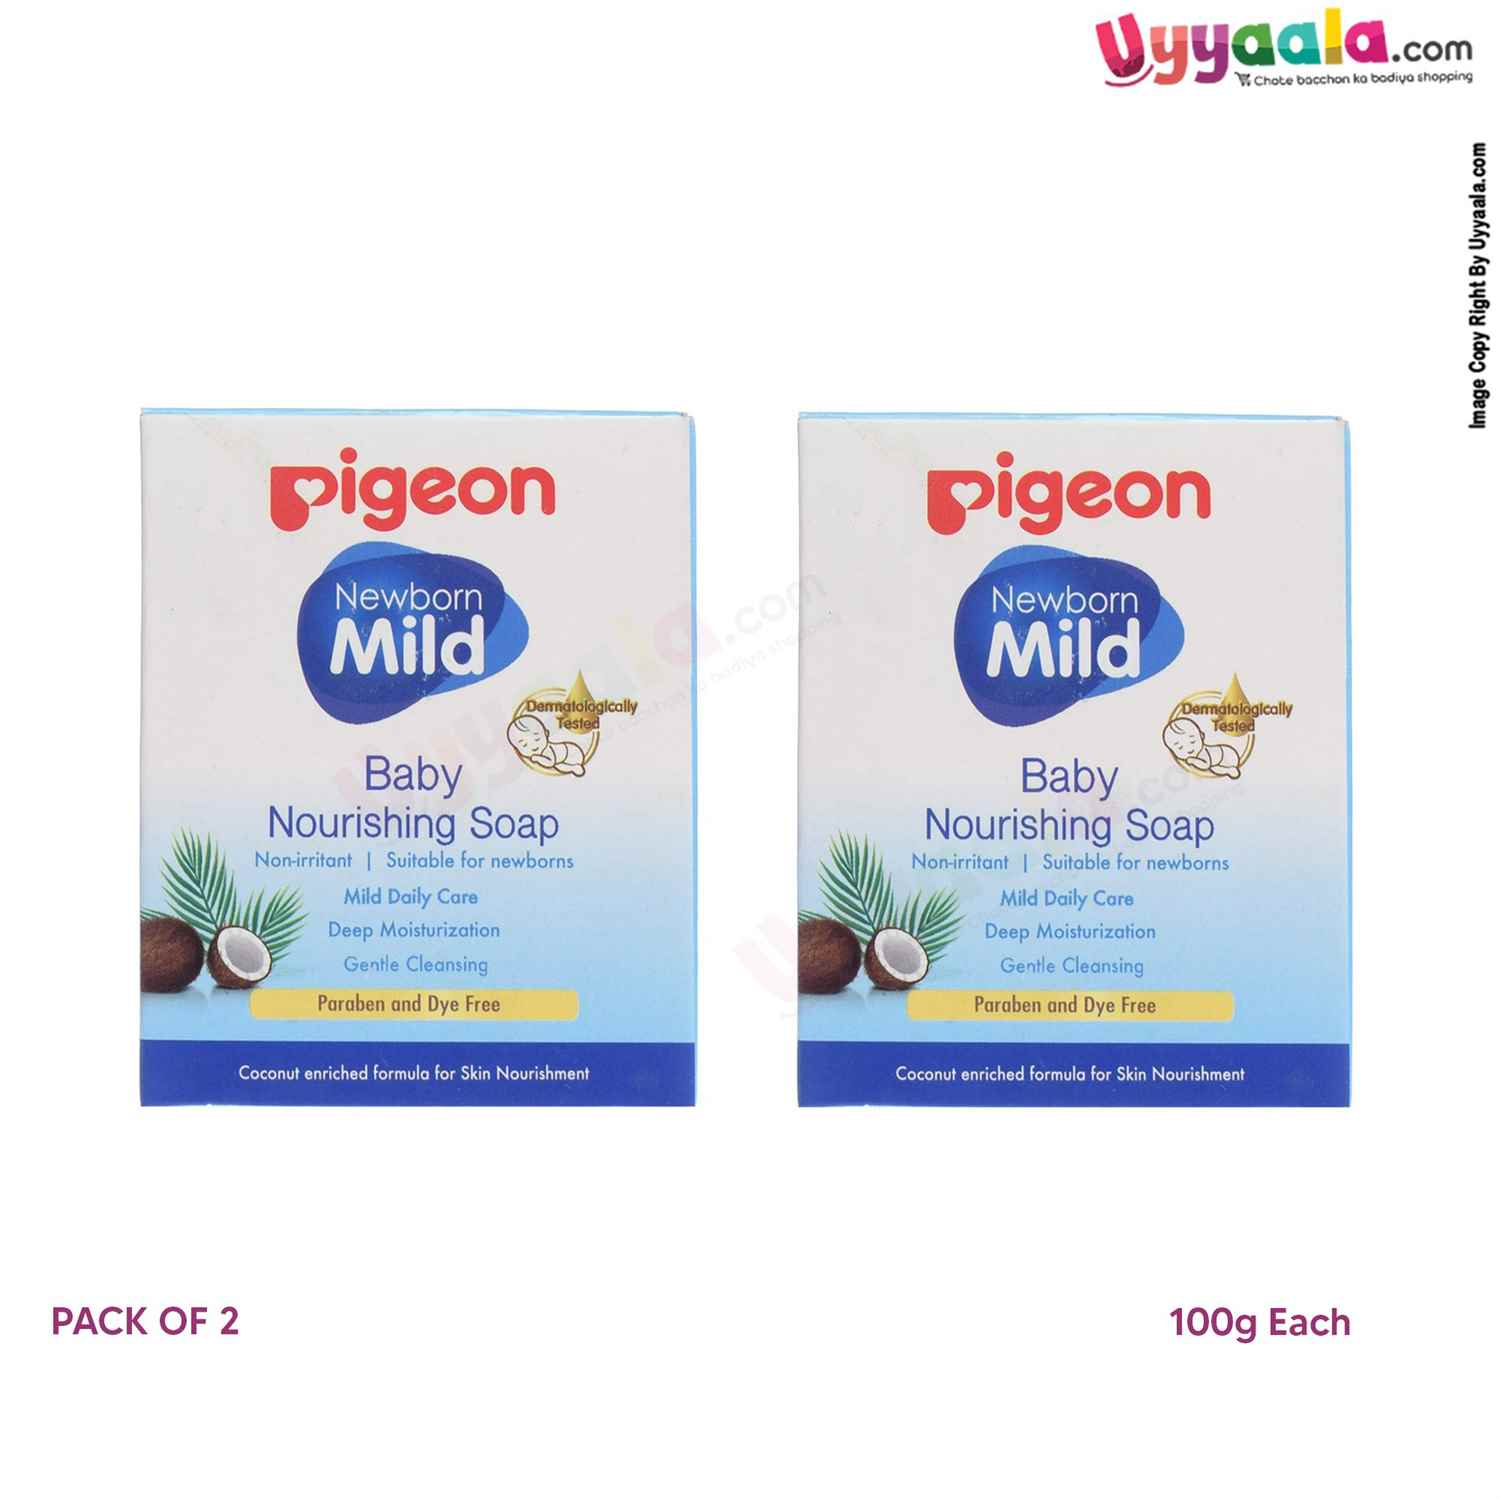 PIGEON New Born Mild Baby Nourishing Soap Pack of  2 - 100g Each